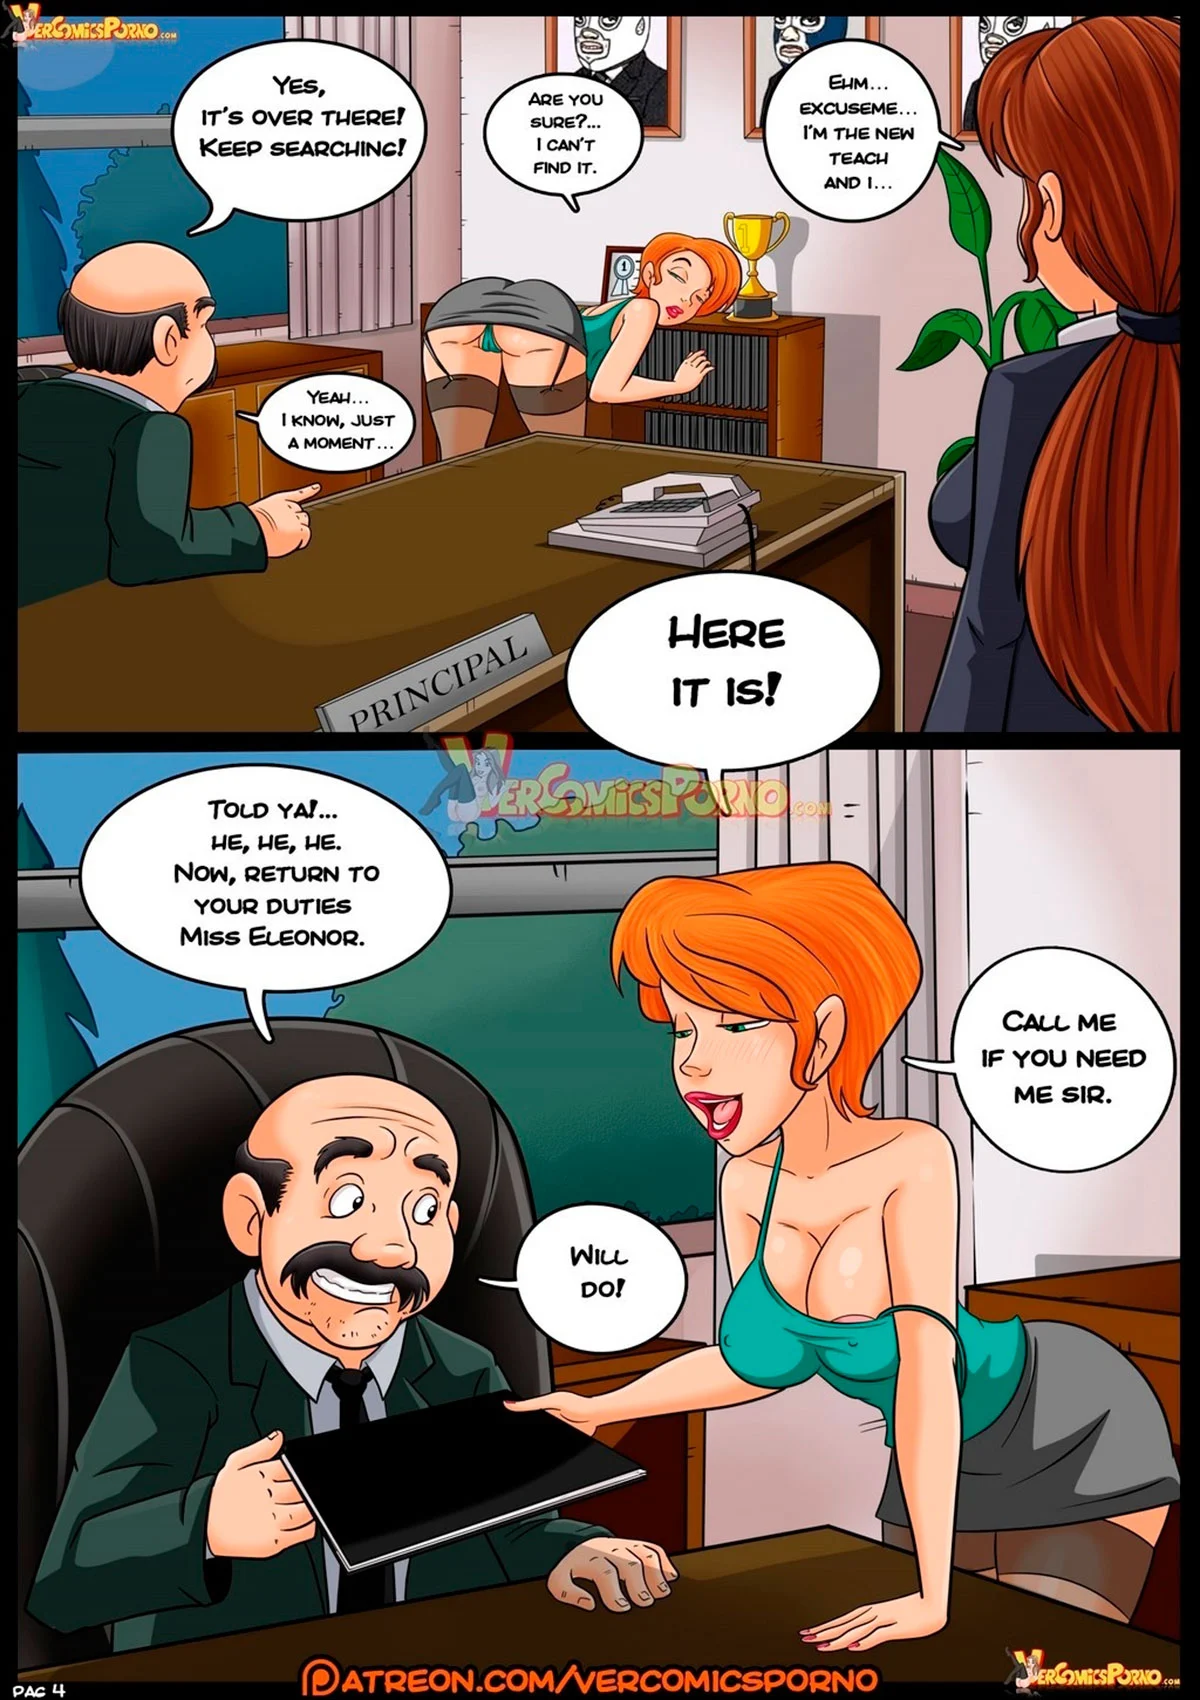 Croc comic "Valery Chronicles" - page 4